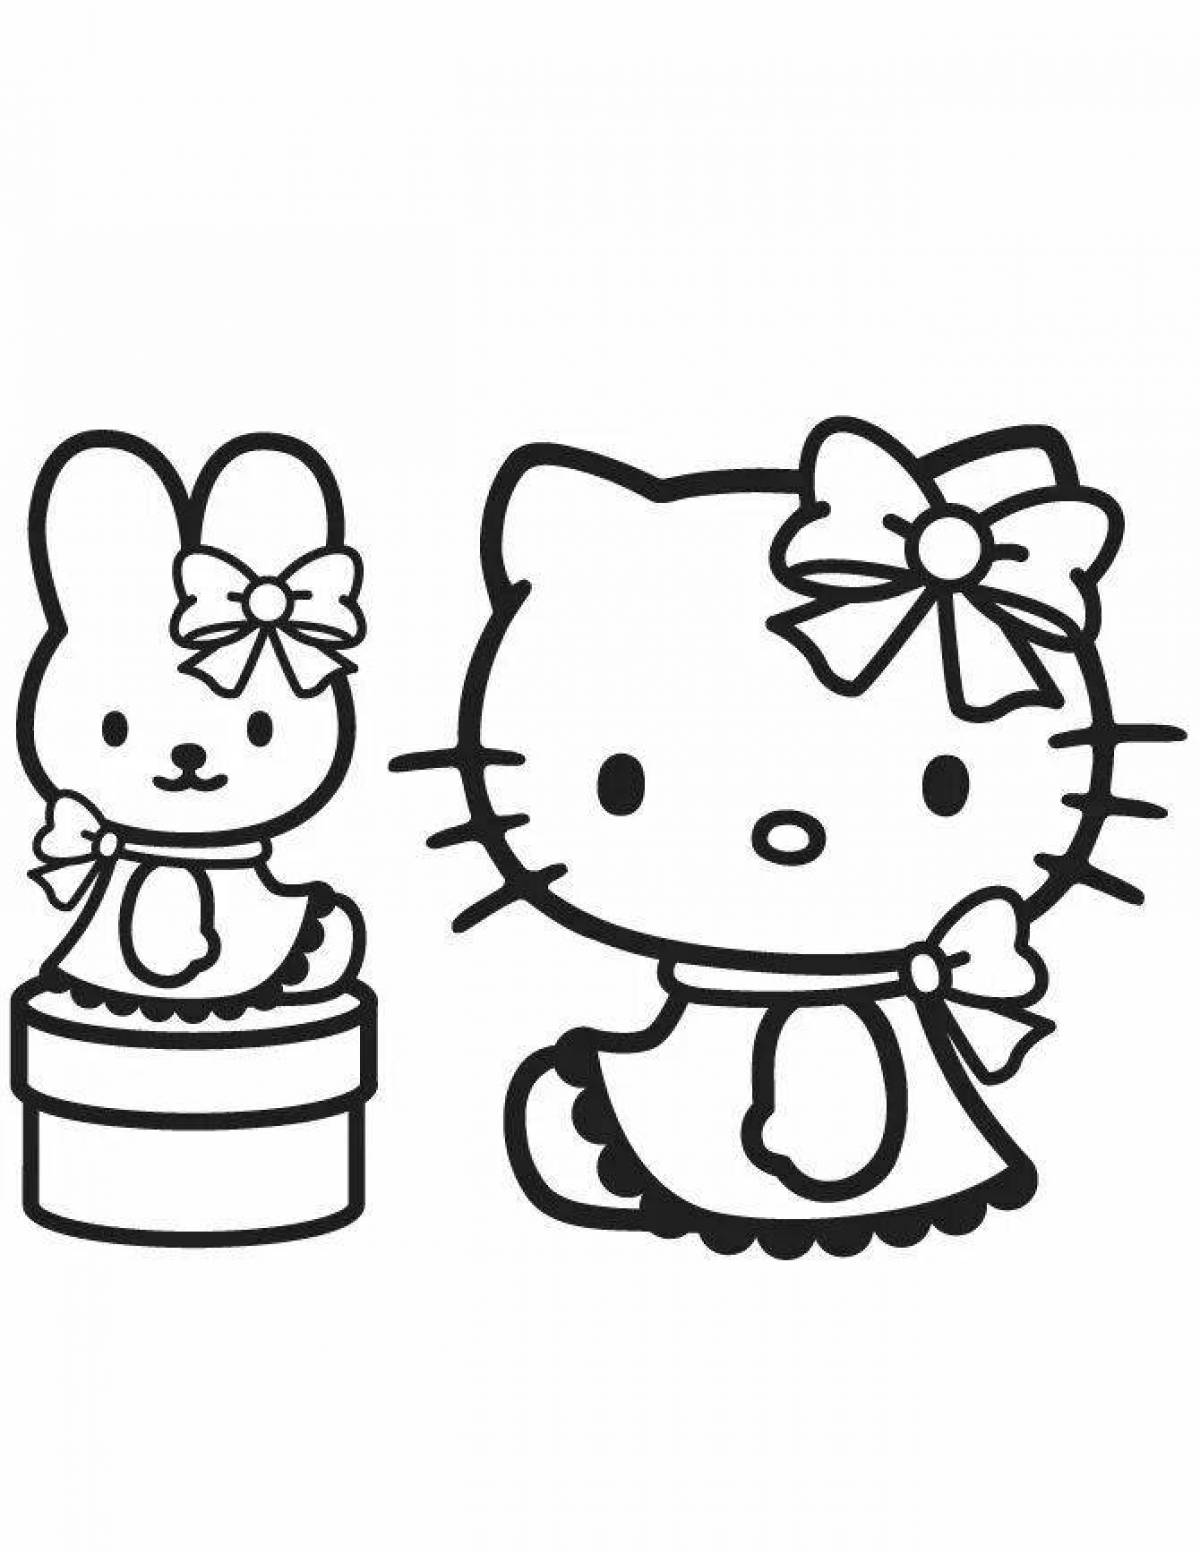 Charming hello kitty regular without bow and clothes